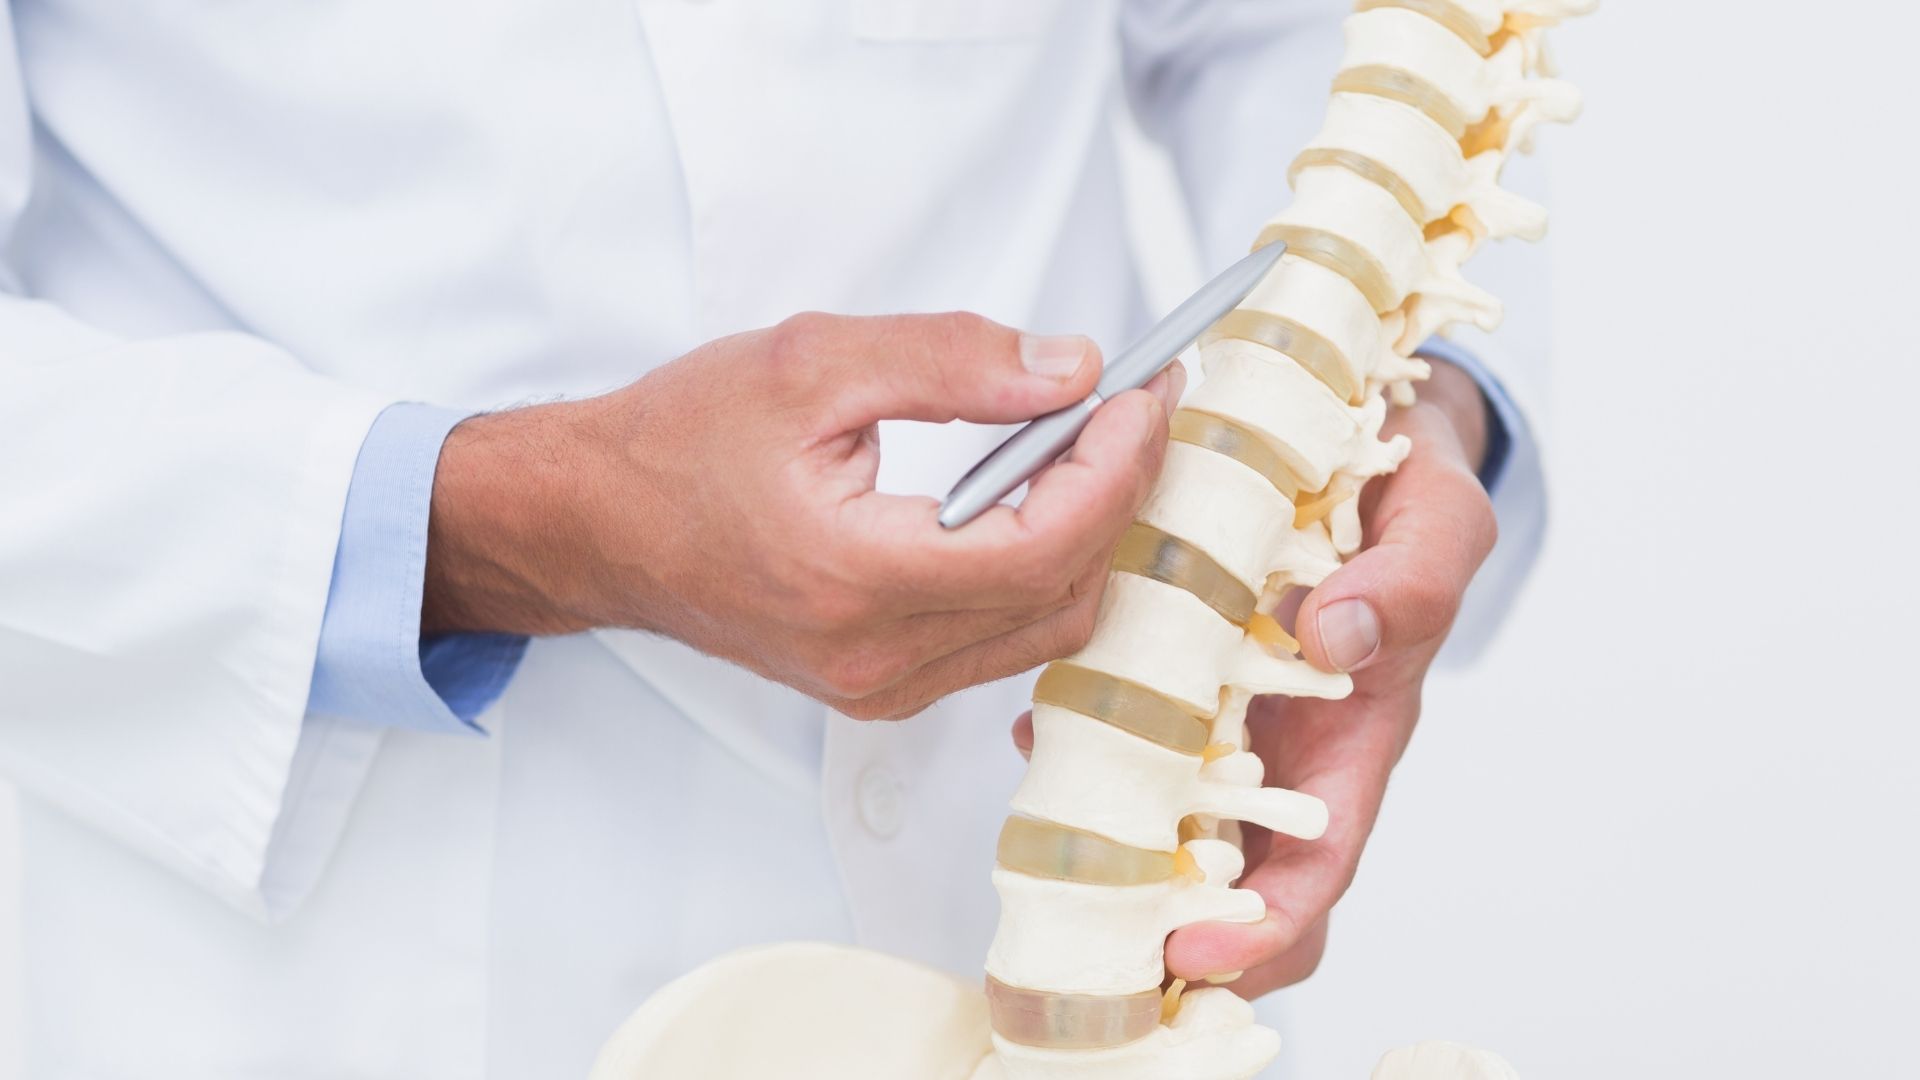 MIS Spinal Implants vs. Open Spinal Implants: Who Will Dominate the Market in 2022?